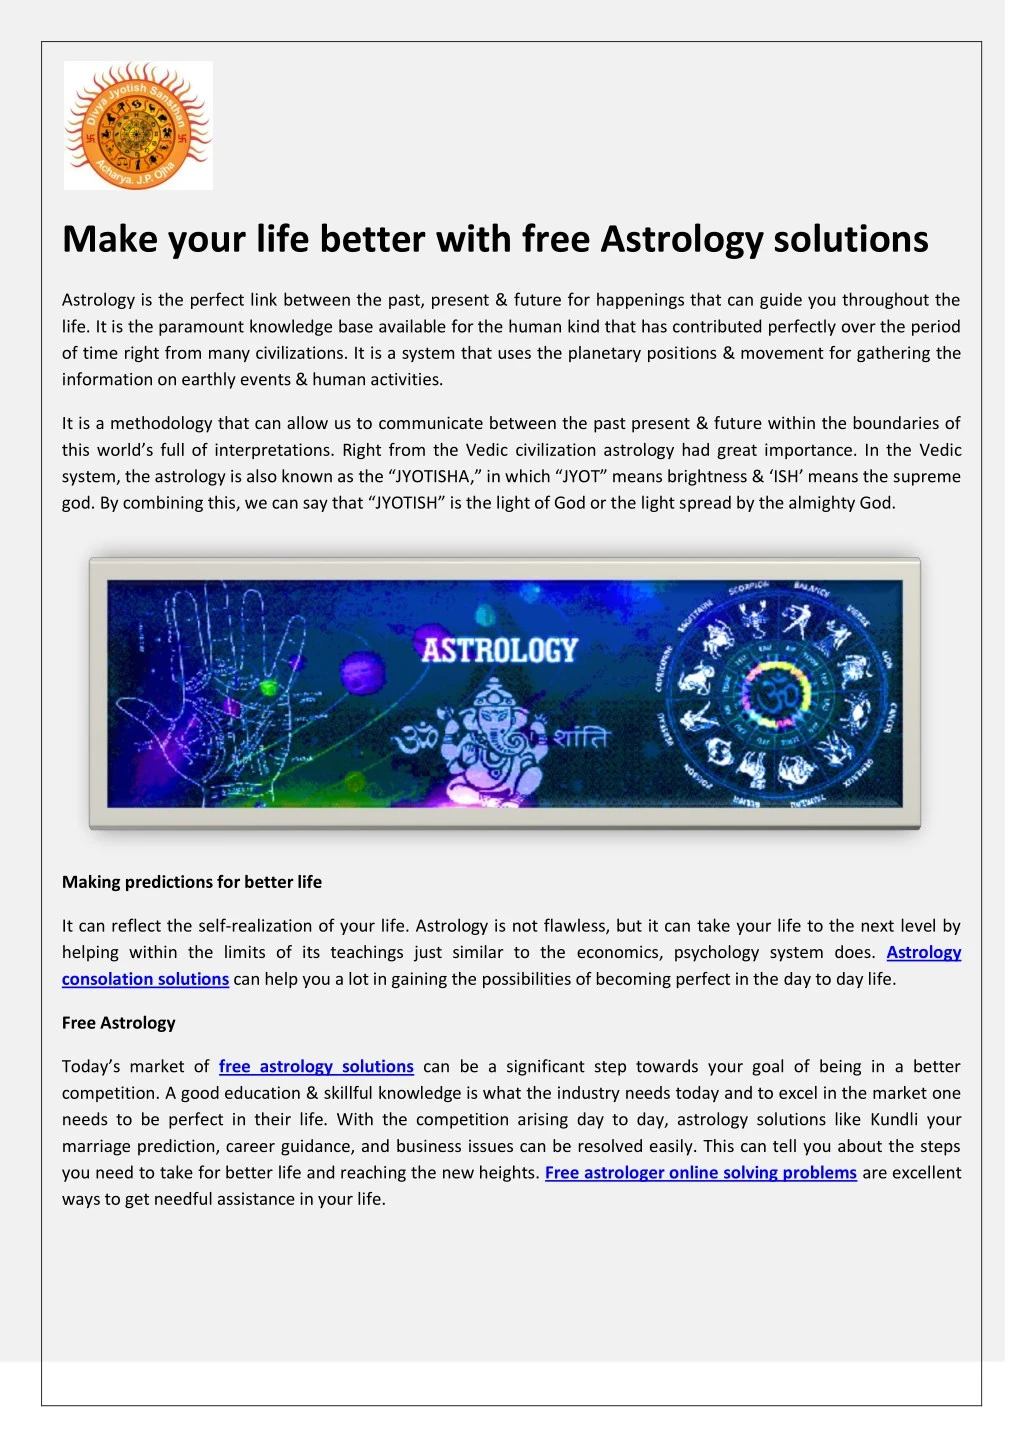 make your life better with free astrology